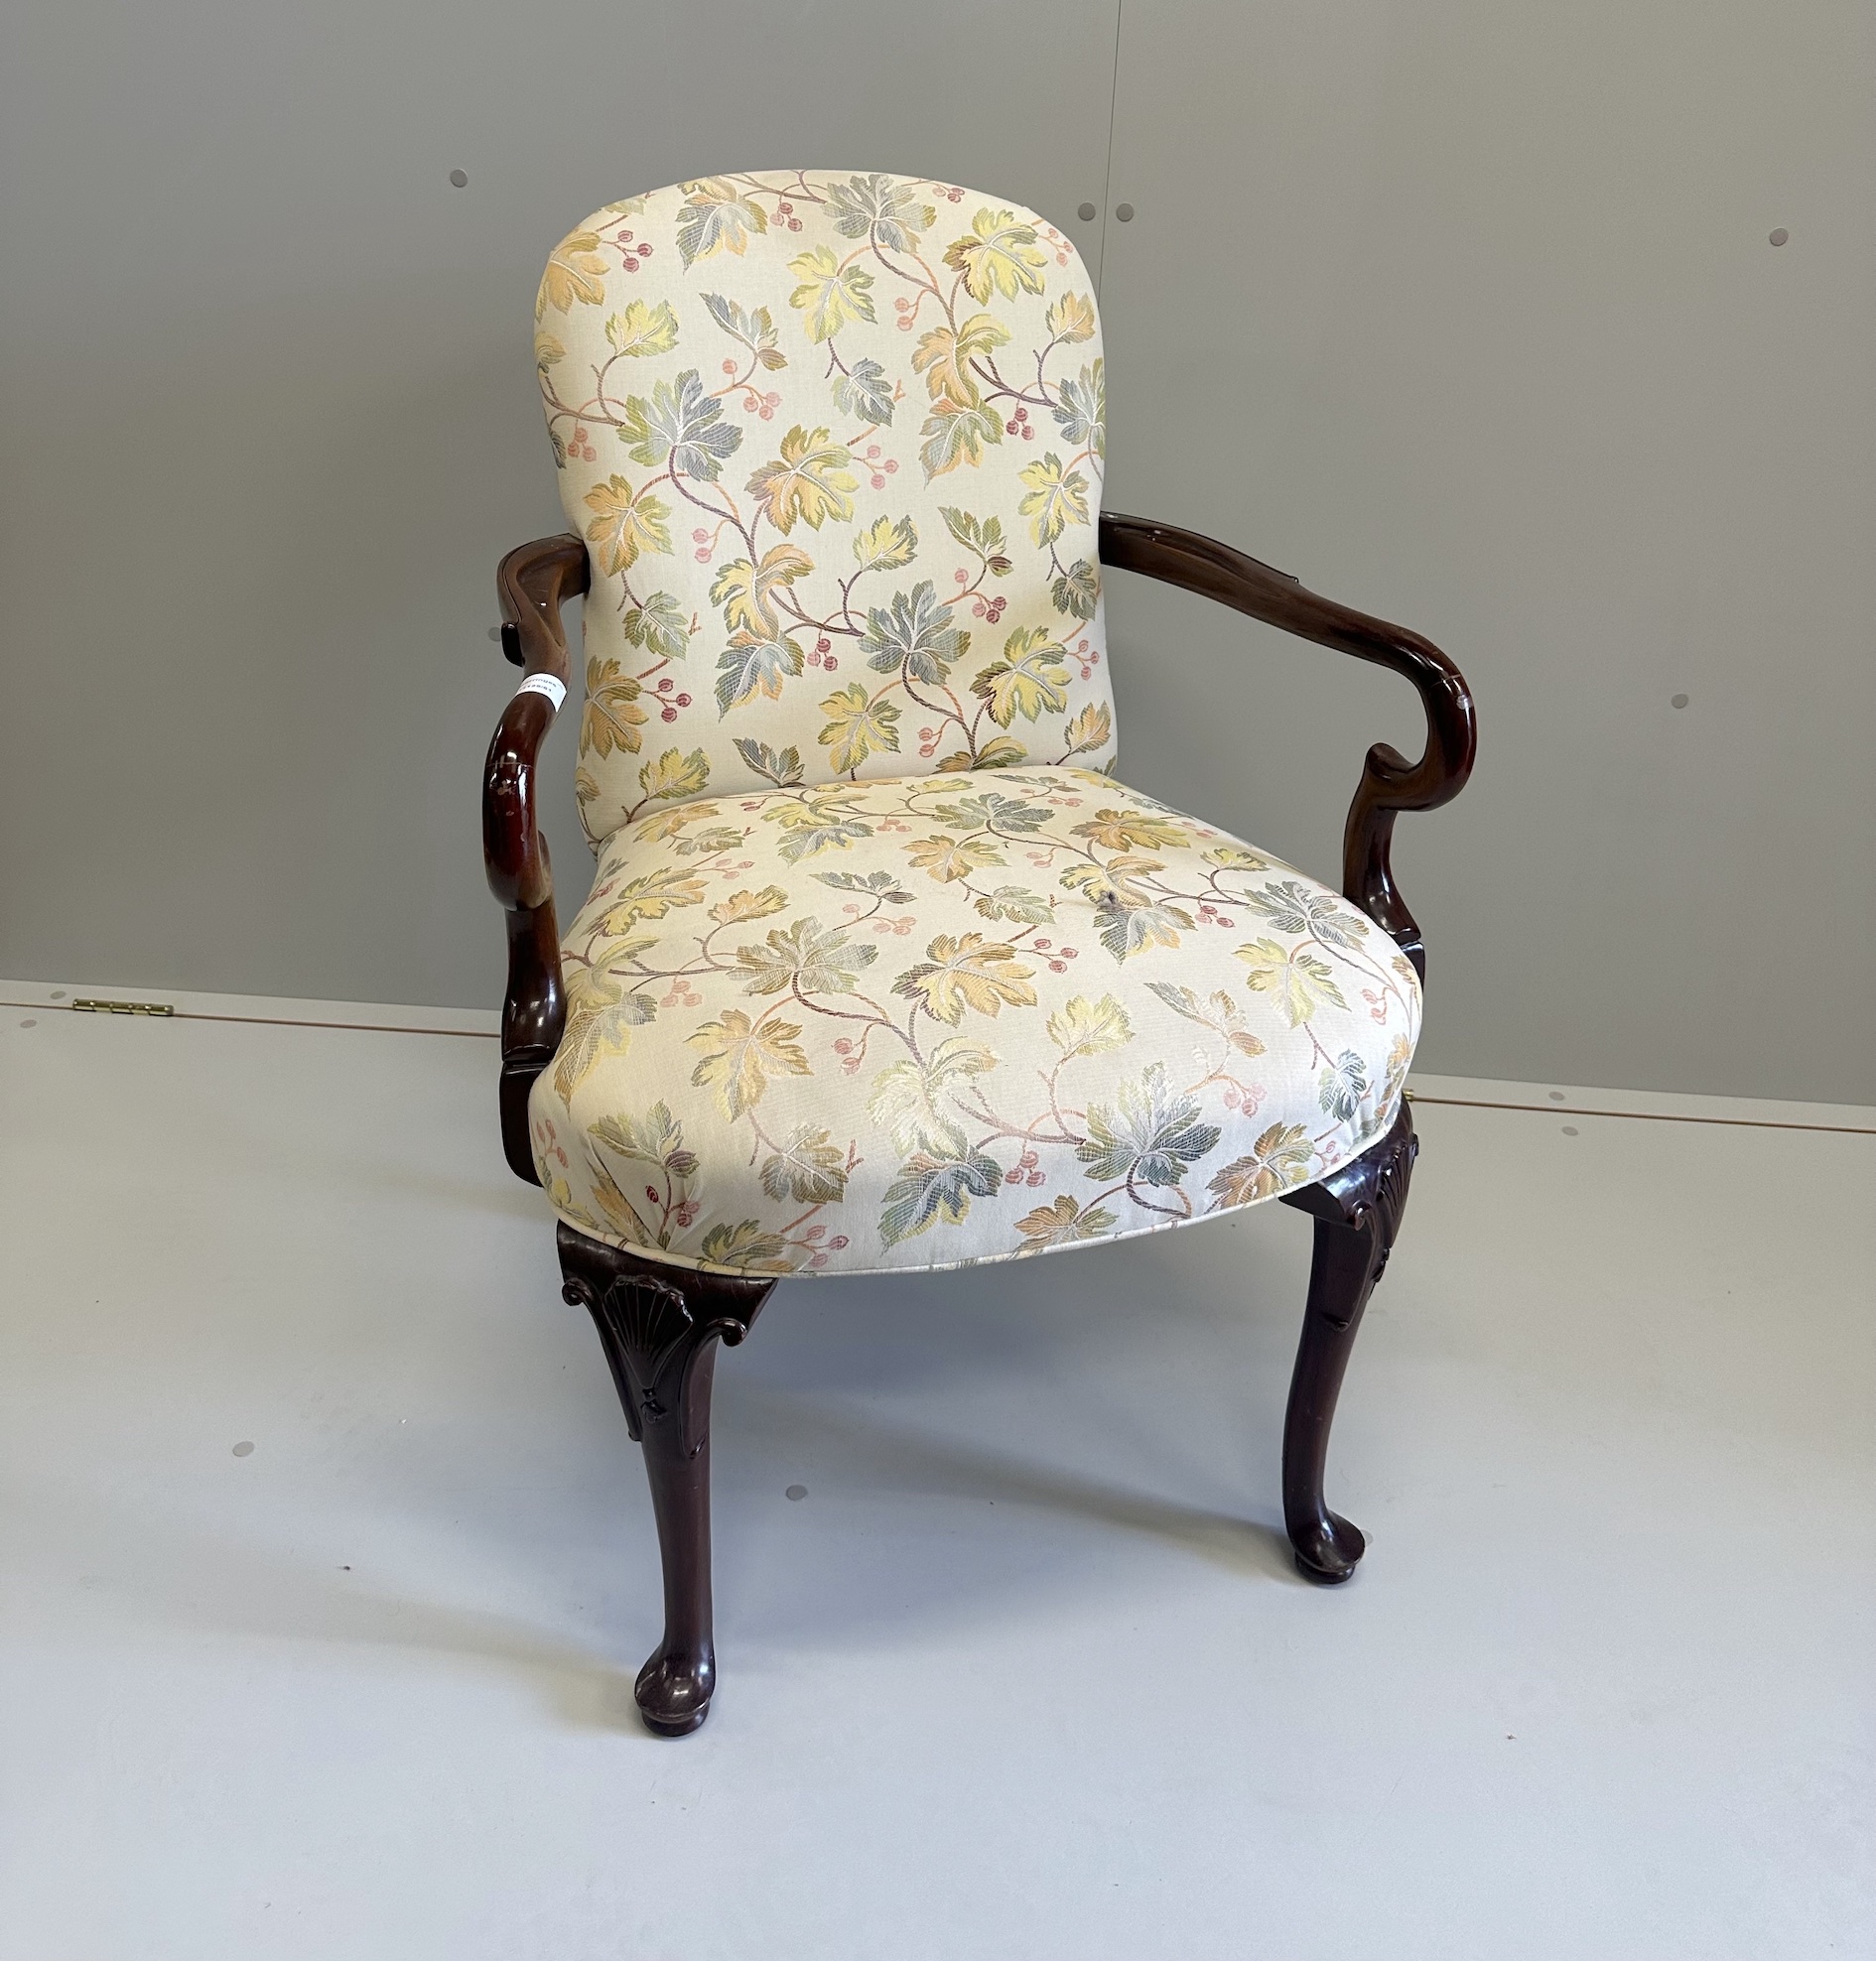 A reproduction George III style mahogany framed elbow chair, width 58cm, depth 50cm, height 95cm